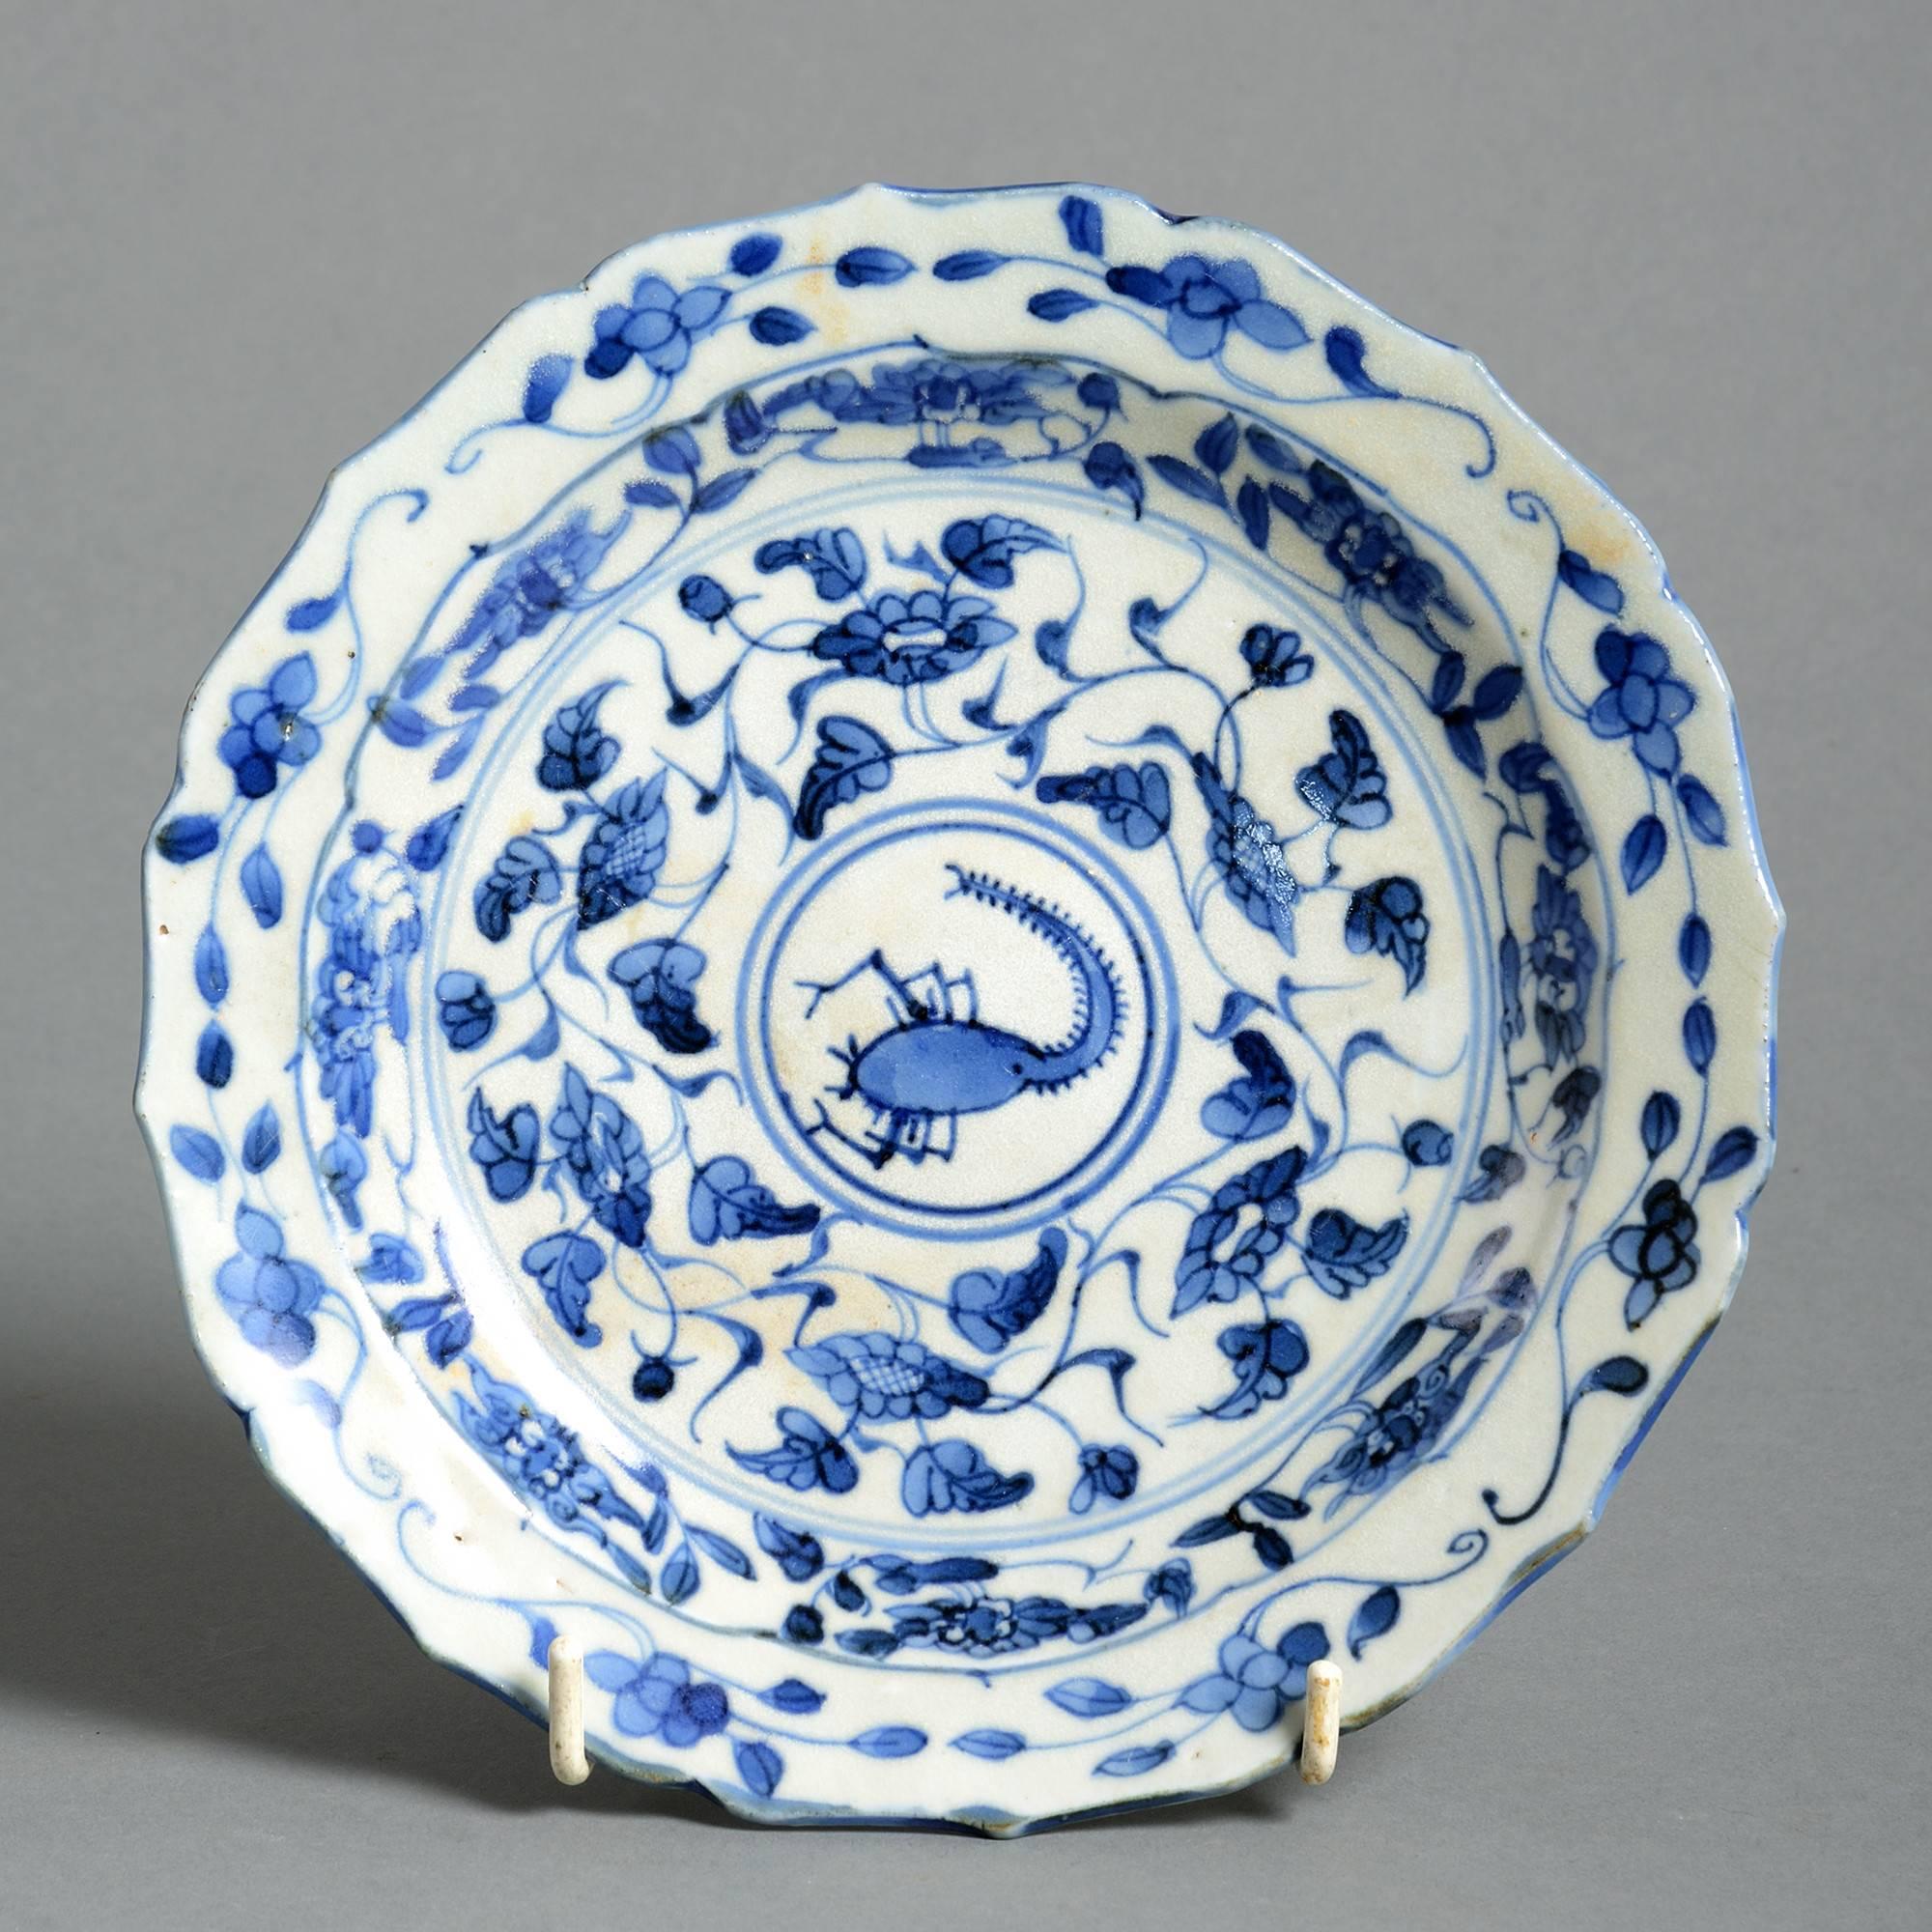 A mid-16th century blue and white glazed porcelain plate, having a shaped edge, with foliate decoration and depicting a stylized scorpion to the centre. 

Ming dynasty, Jiajing period (1521–1567).